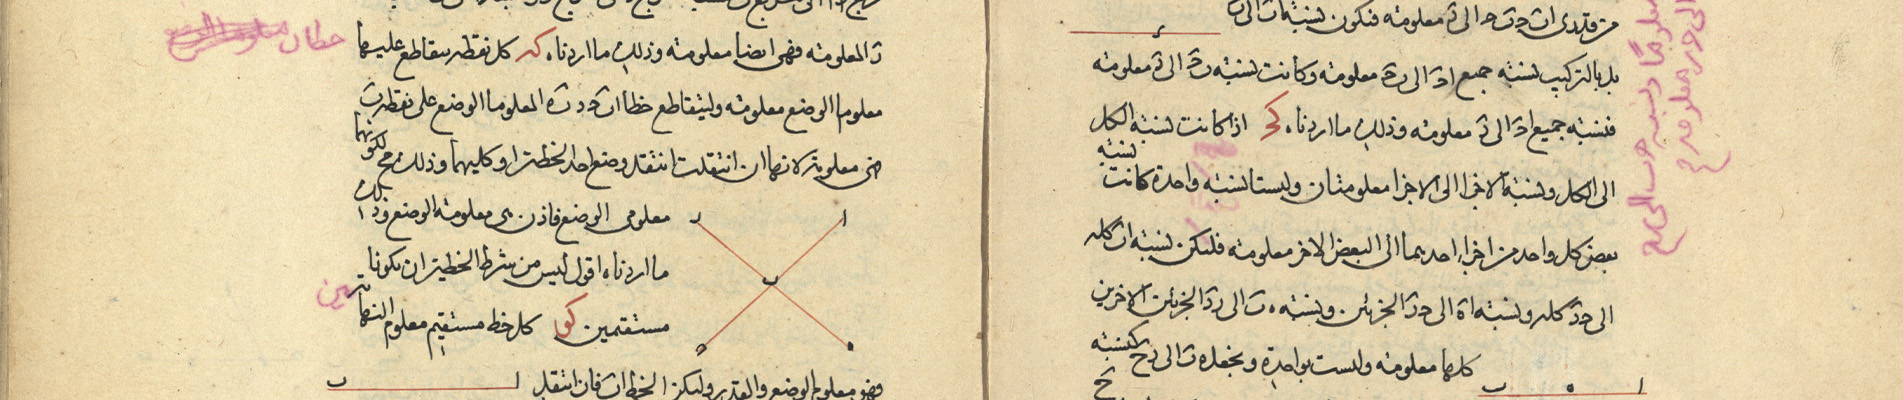 About the Islamic Manuscript Collection